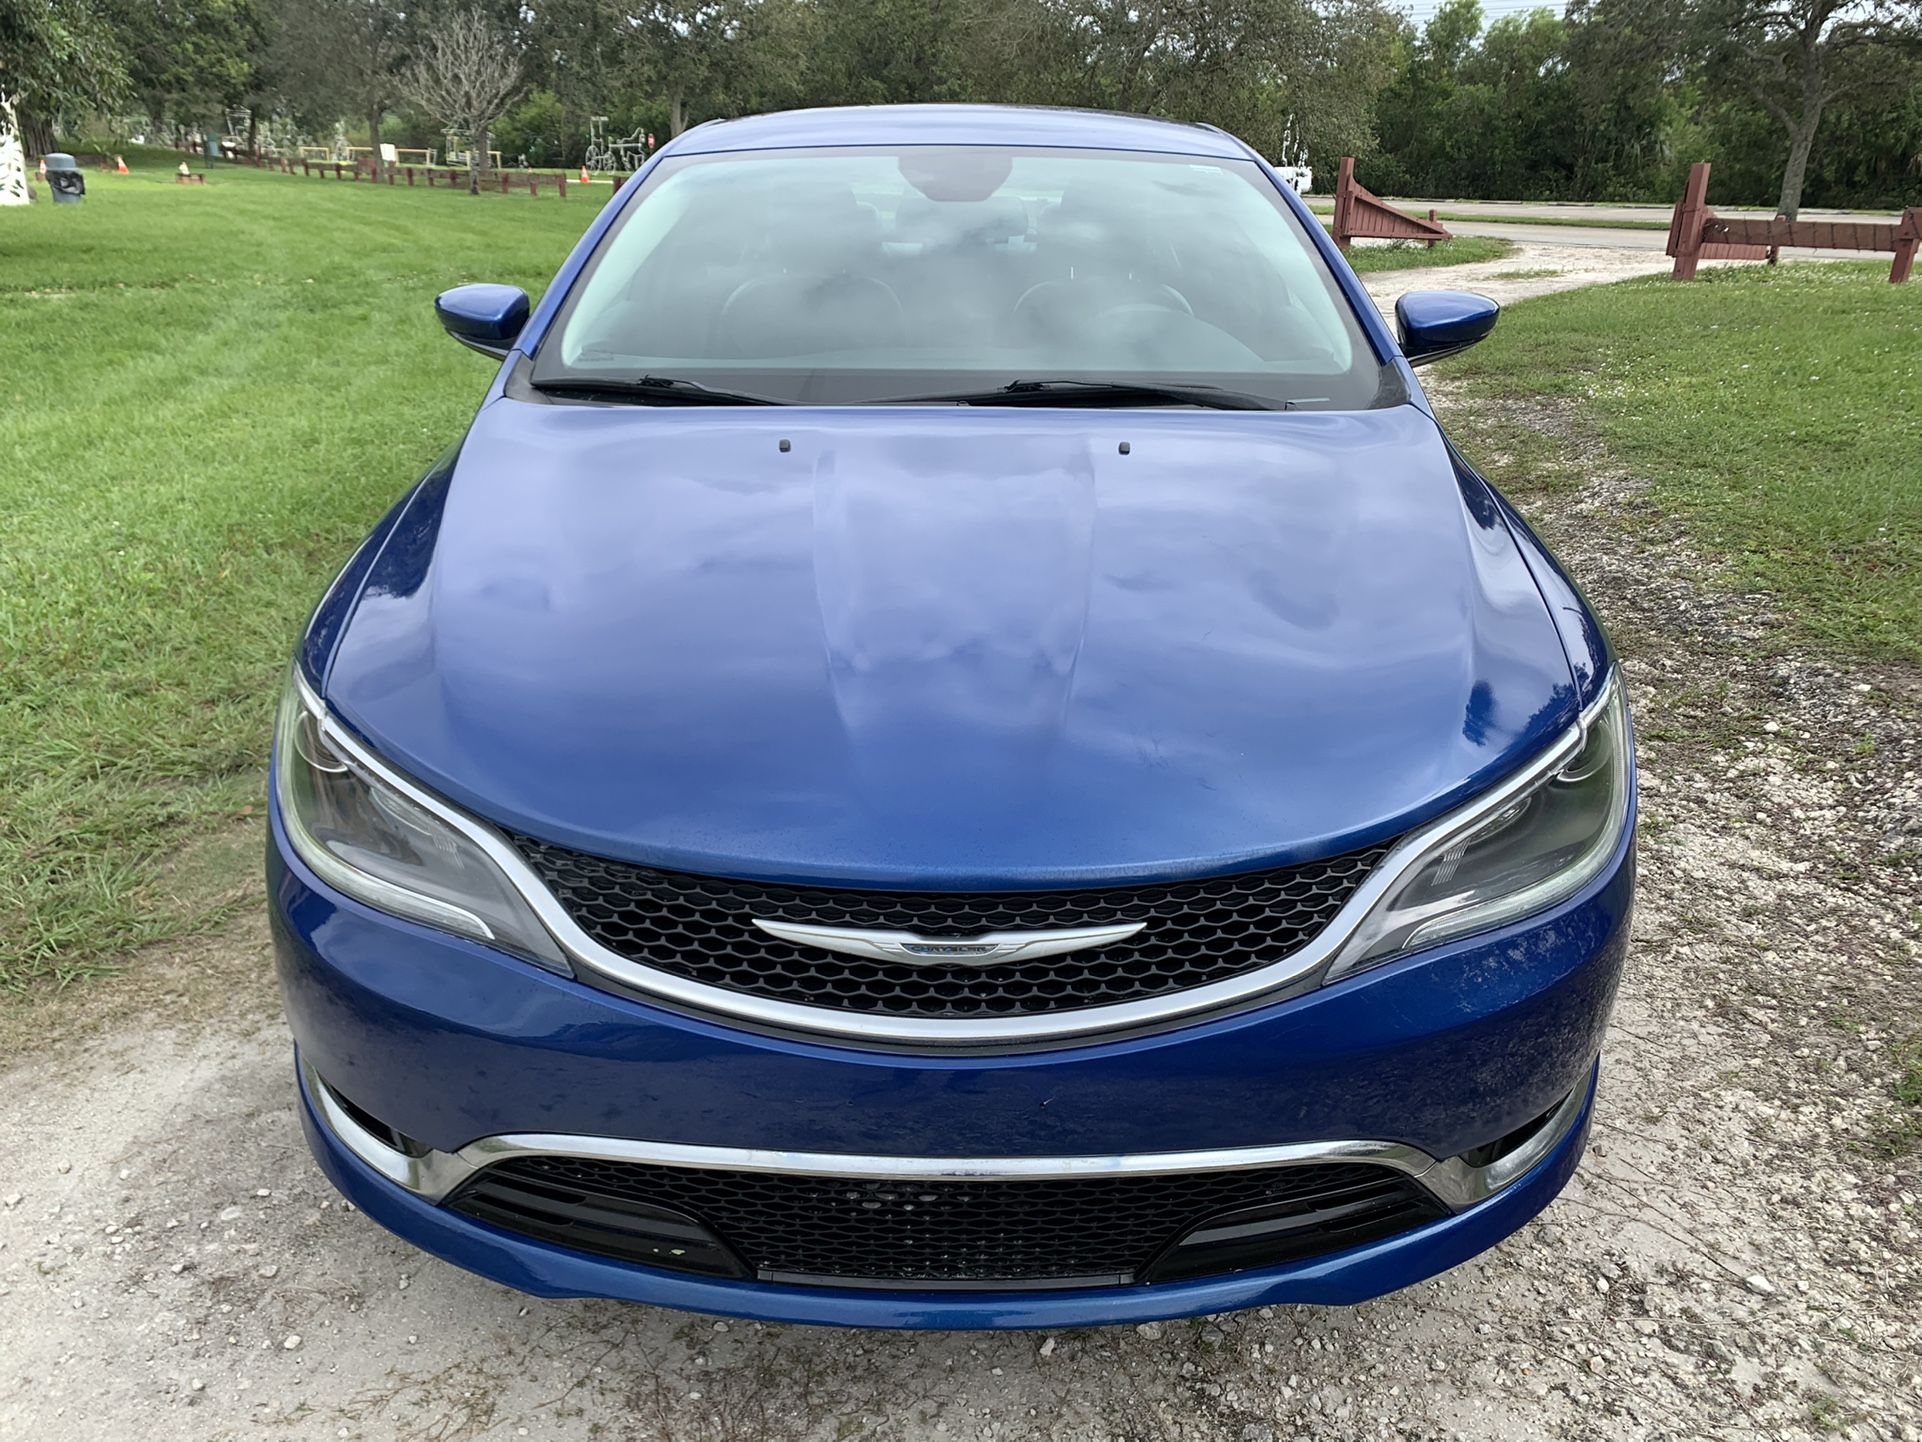 Everyone Can Be Approved With $2,800 Down Payment! 2015 Chrysler 200C 2.4 Clean Title